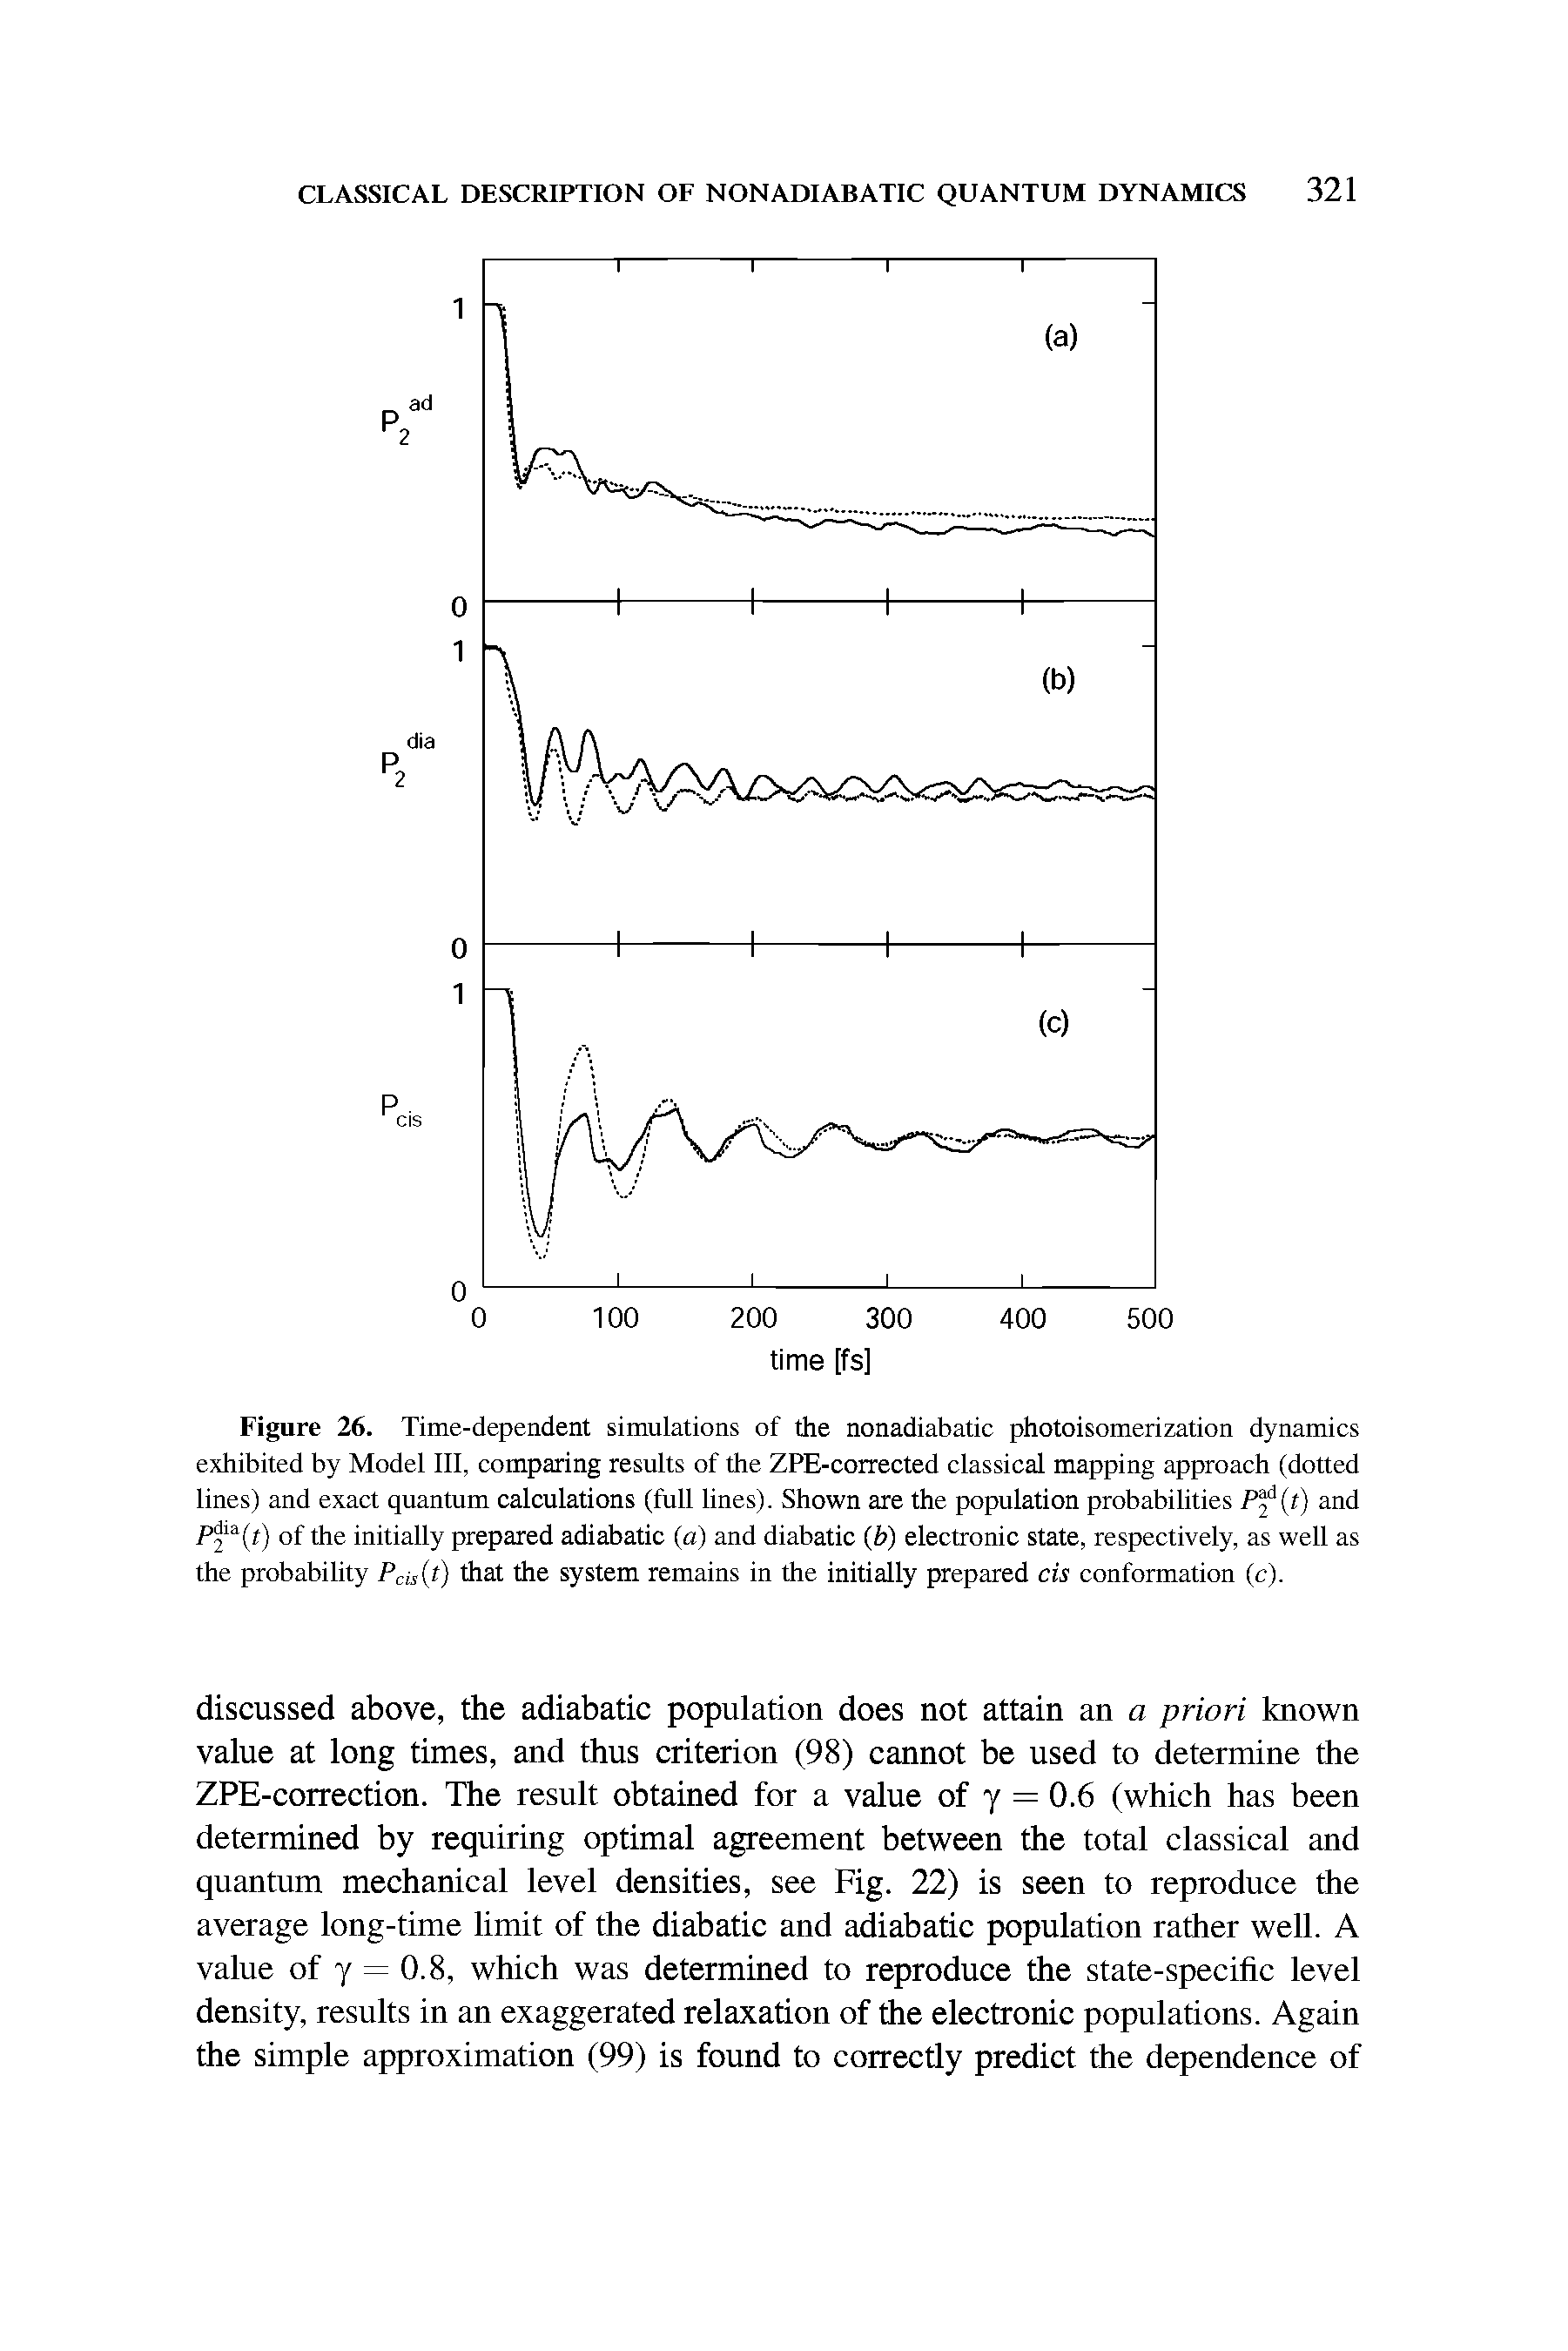 Figure 26. Time-dependent simulations of the nonadiabatic photoisomerization dynamics exhibited by Model III, comparing results of the ZPE-corrected classical mapping approach (dotted lines) and exact quantum calculations (full lines). Shown are the population probabilities P t) and of the initially prepared adiabatic (a) and diabatic (b) electronic state, respectively, as well as the probability Pcis t) that the system remains in the initially prepared cis conformation (c).